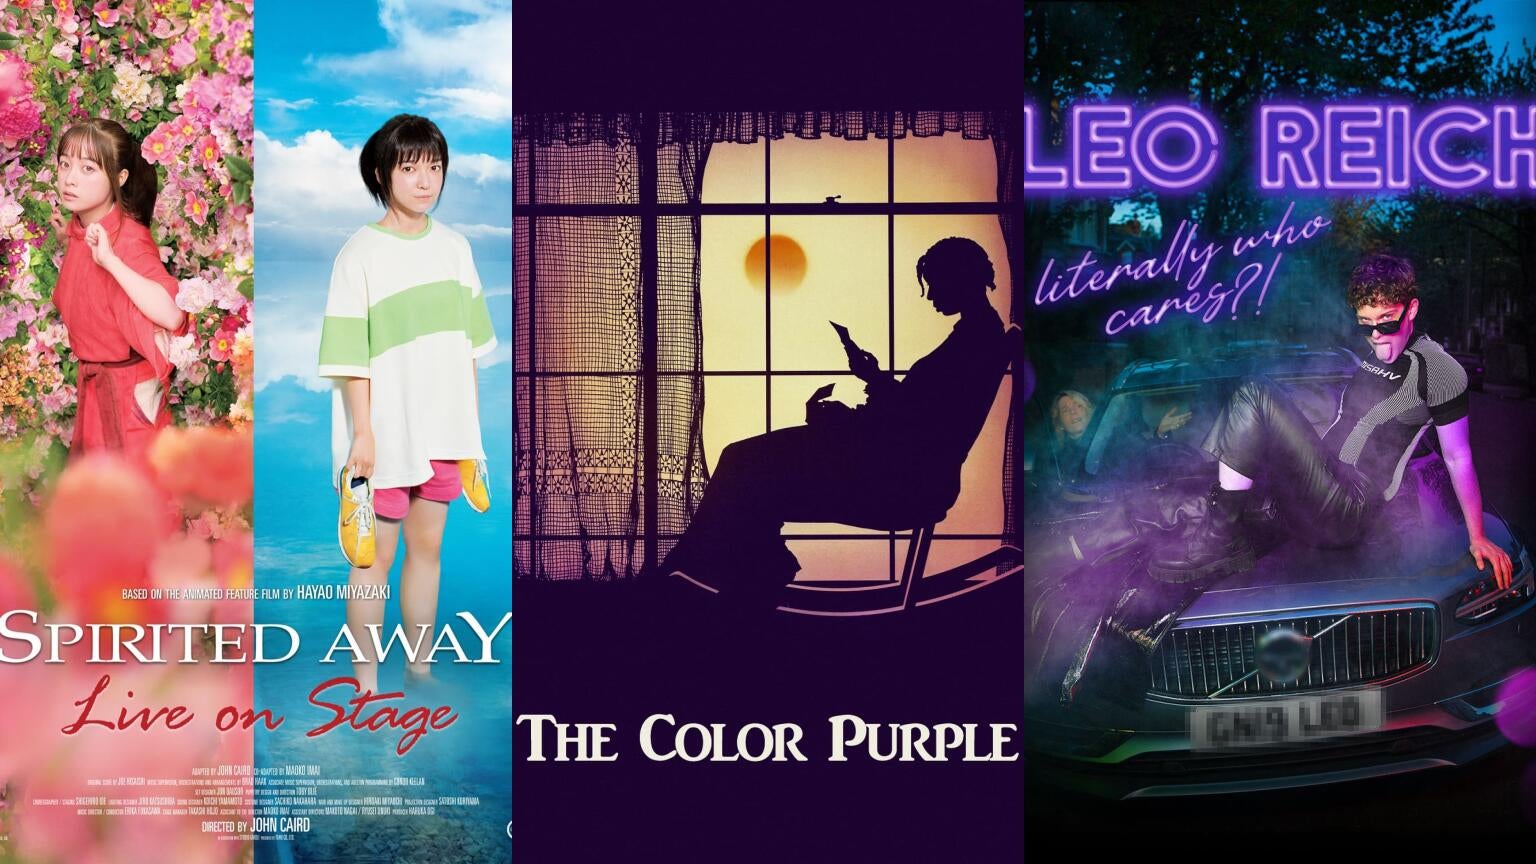 Posters for "Spirited Away: Live on Stage," "The Color Purple," and "Leo Reich: Literally Who Cares?!"